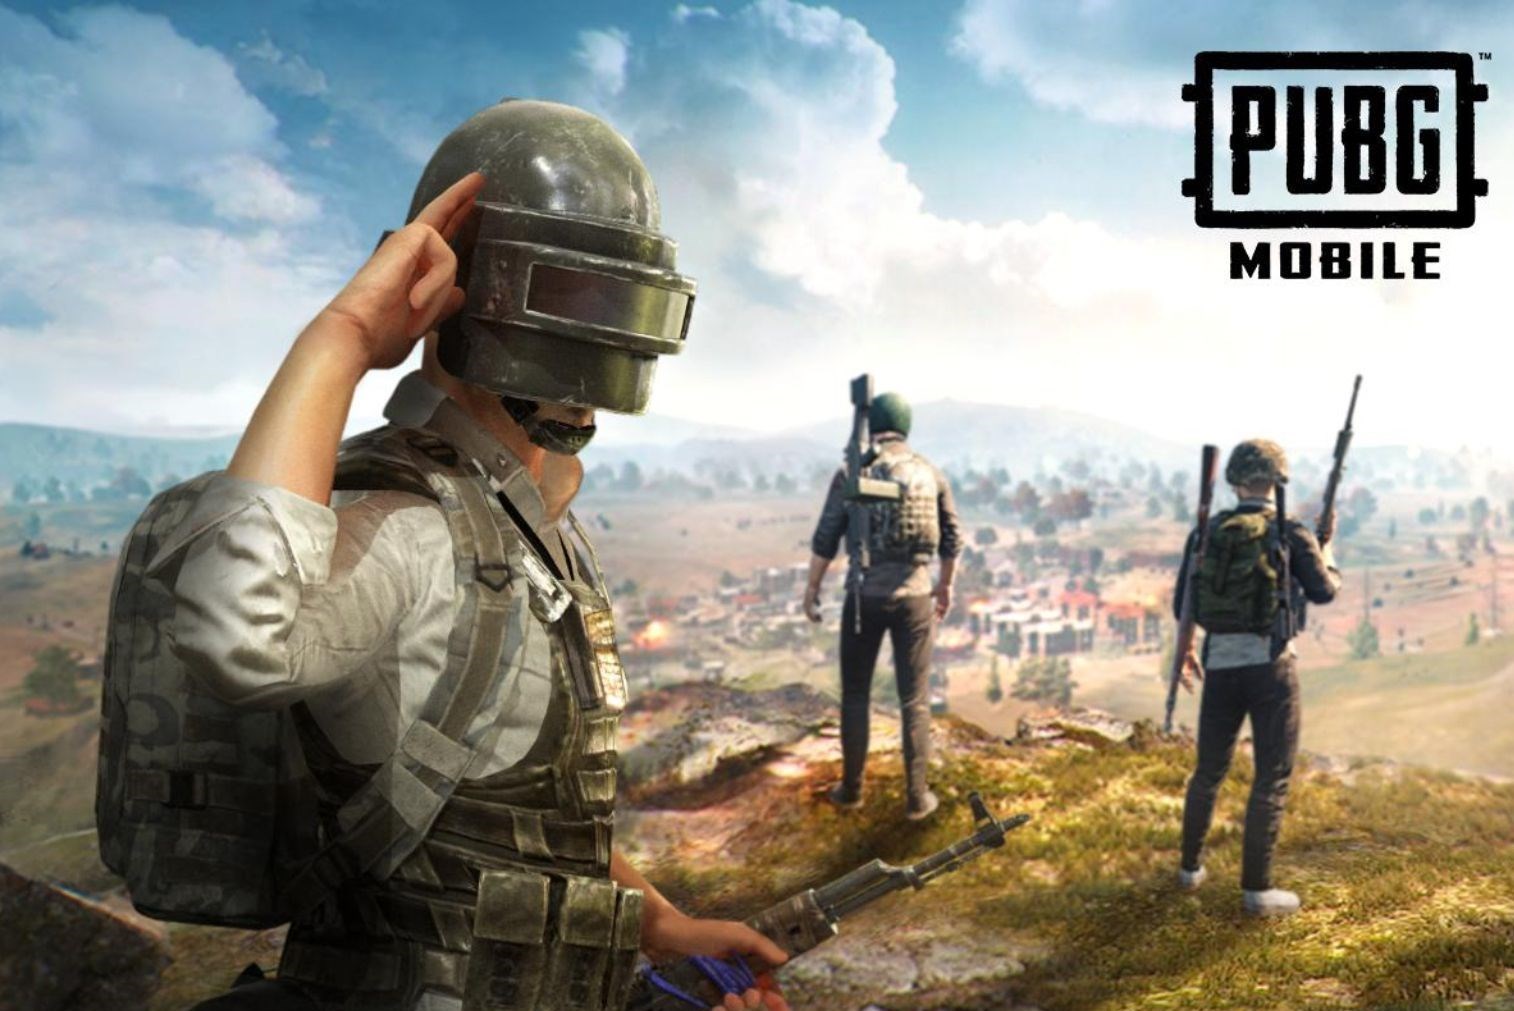 How to buy from the PUBG US site